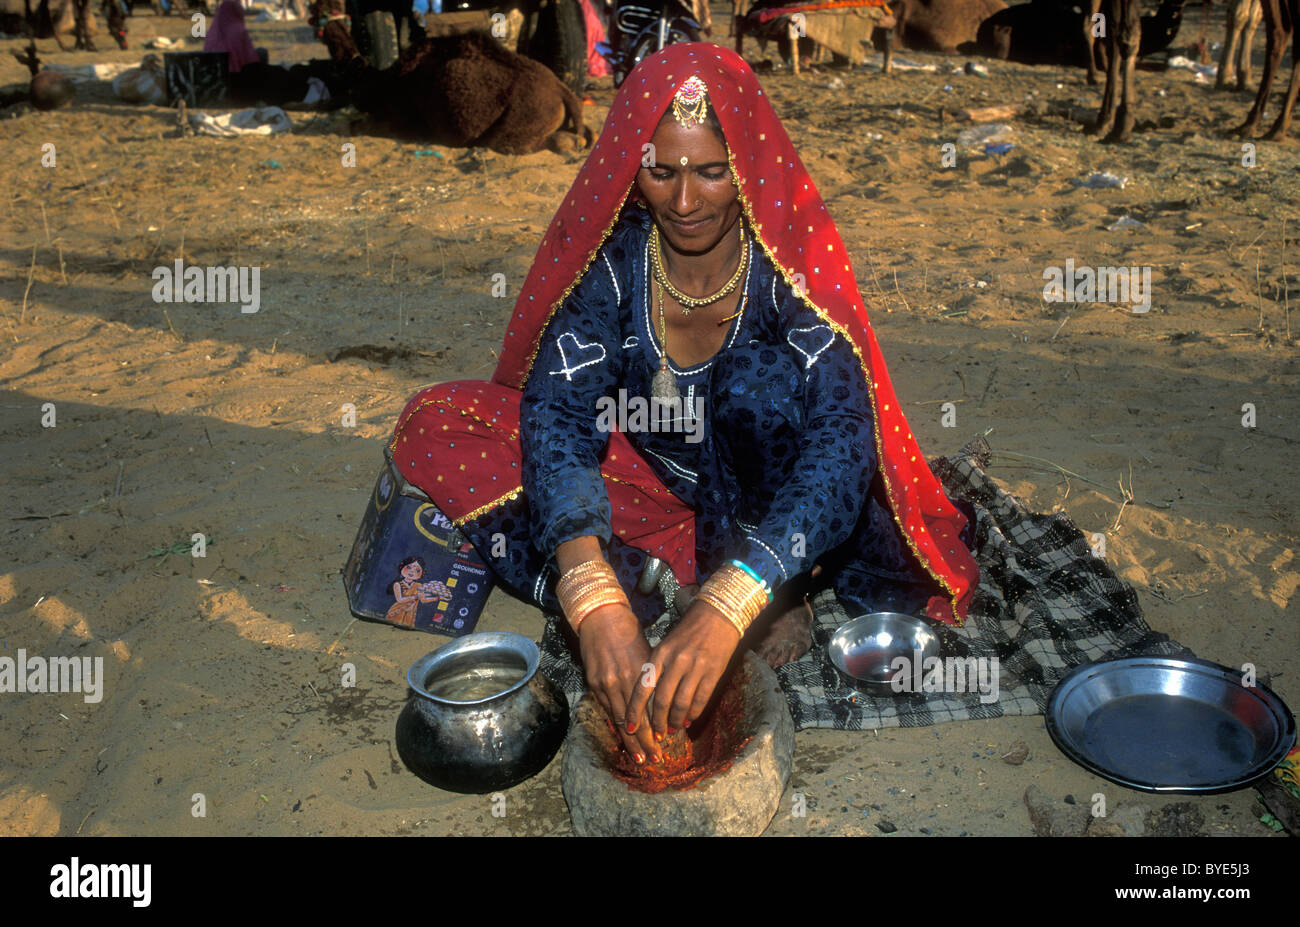 indian-woman-wearing-traditional-clothing-crushing-chillies-in-a-mortar-BYE5J3.jpg